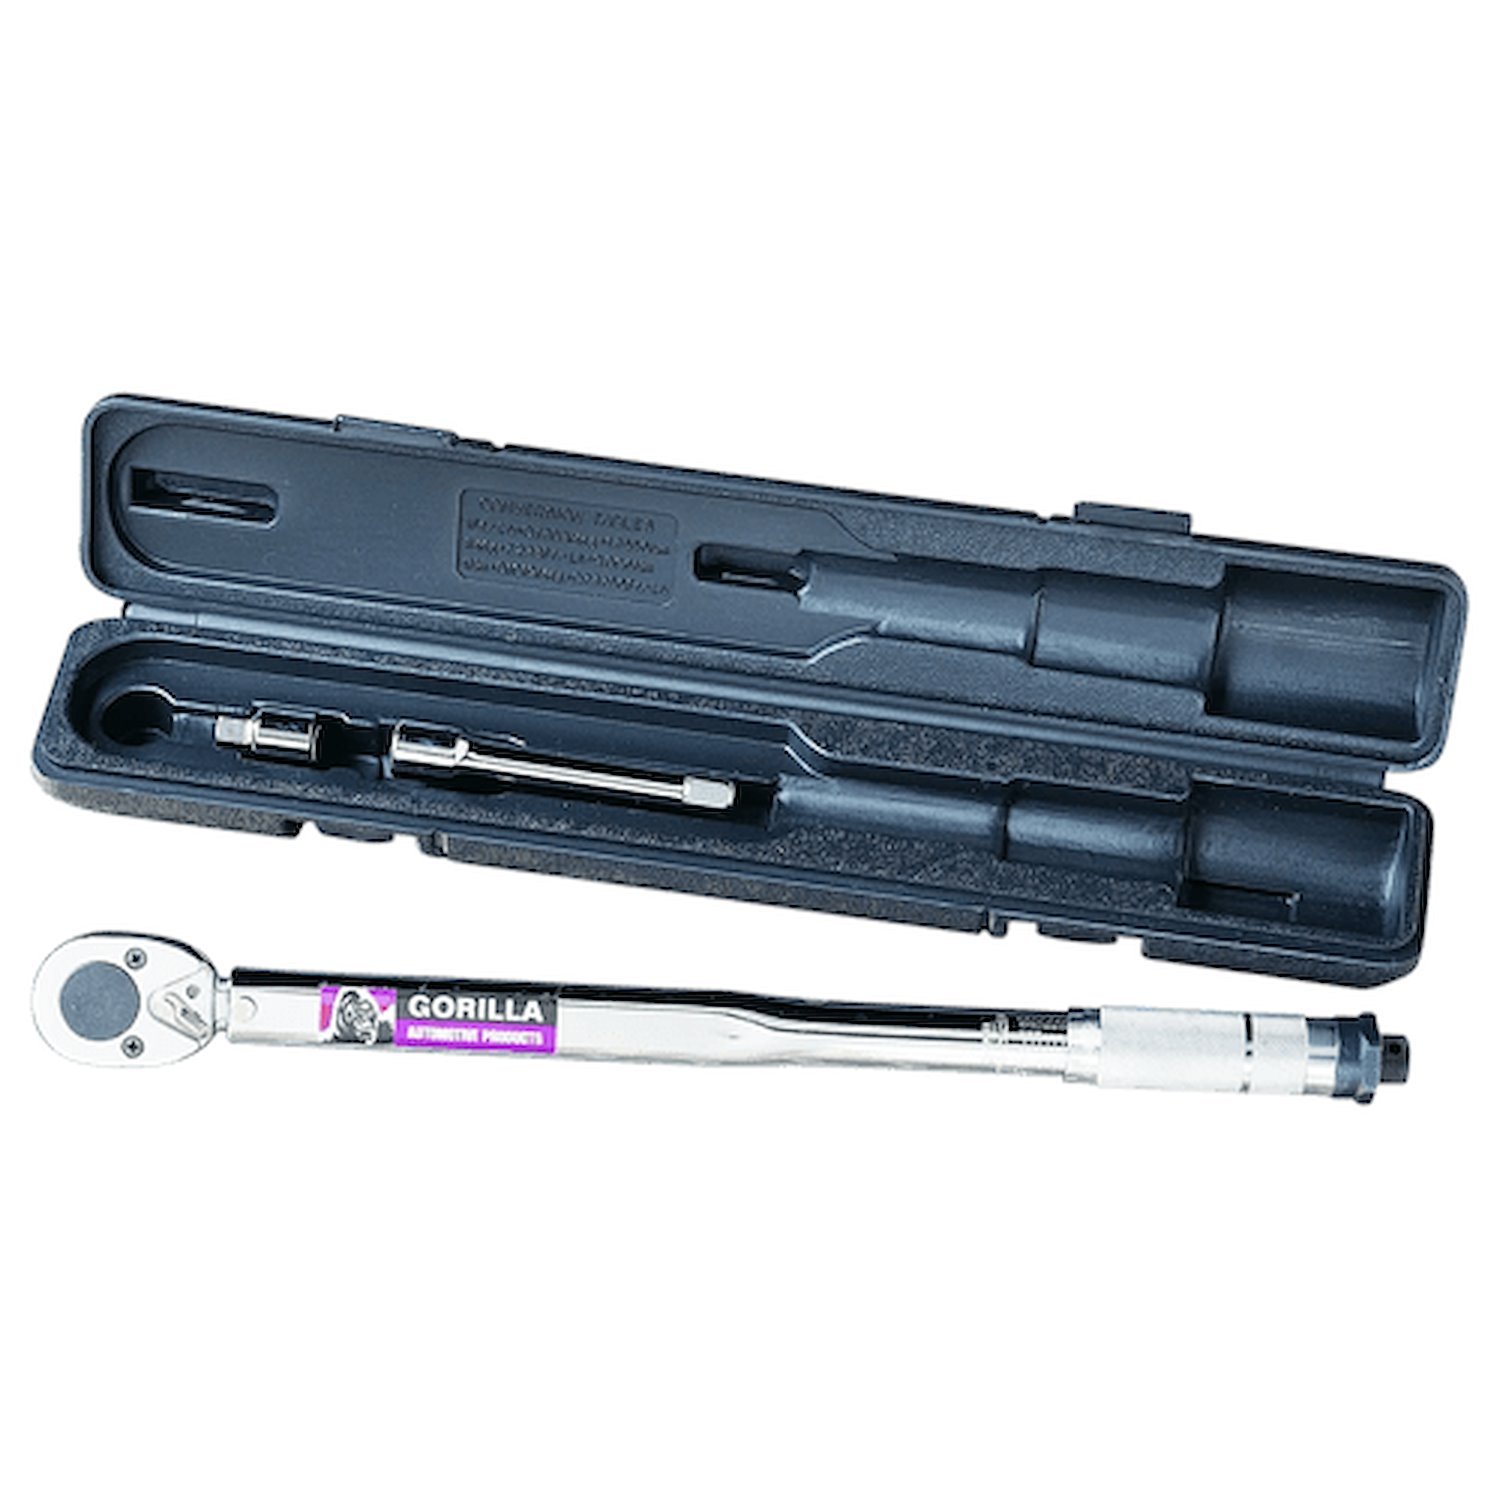 TW605 Torque Wrench, 20-150 Ft/Lbs.